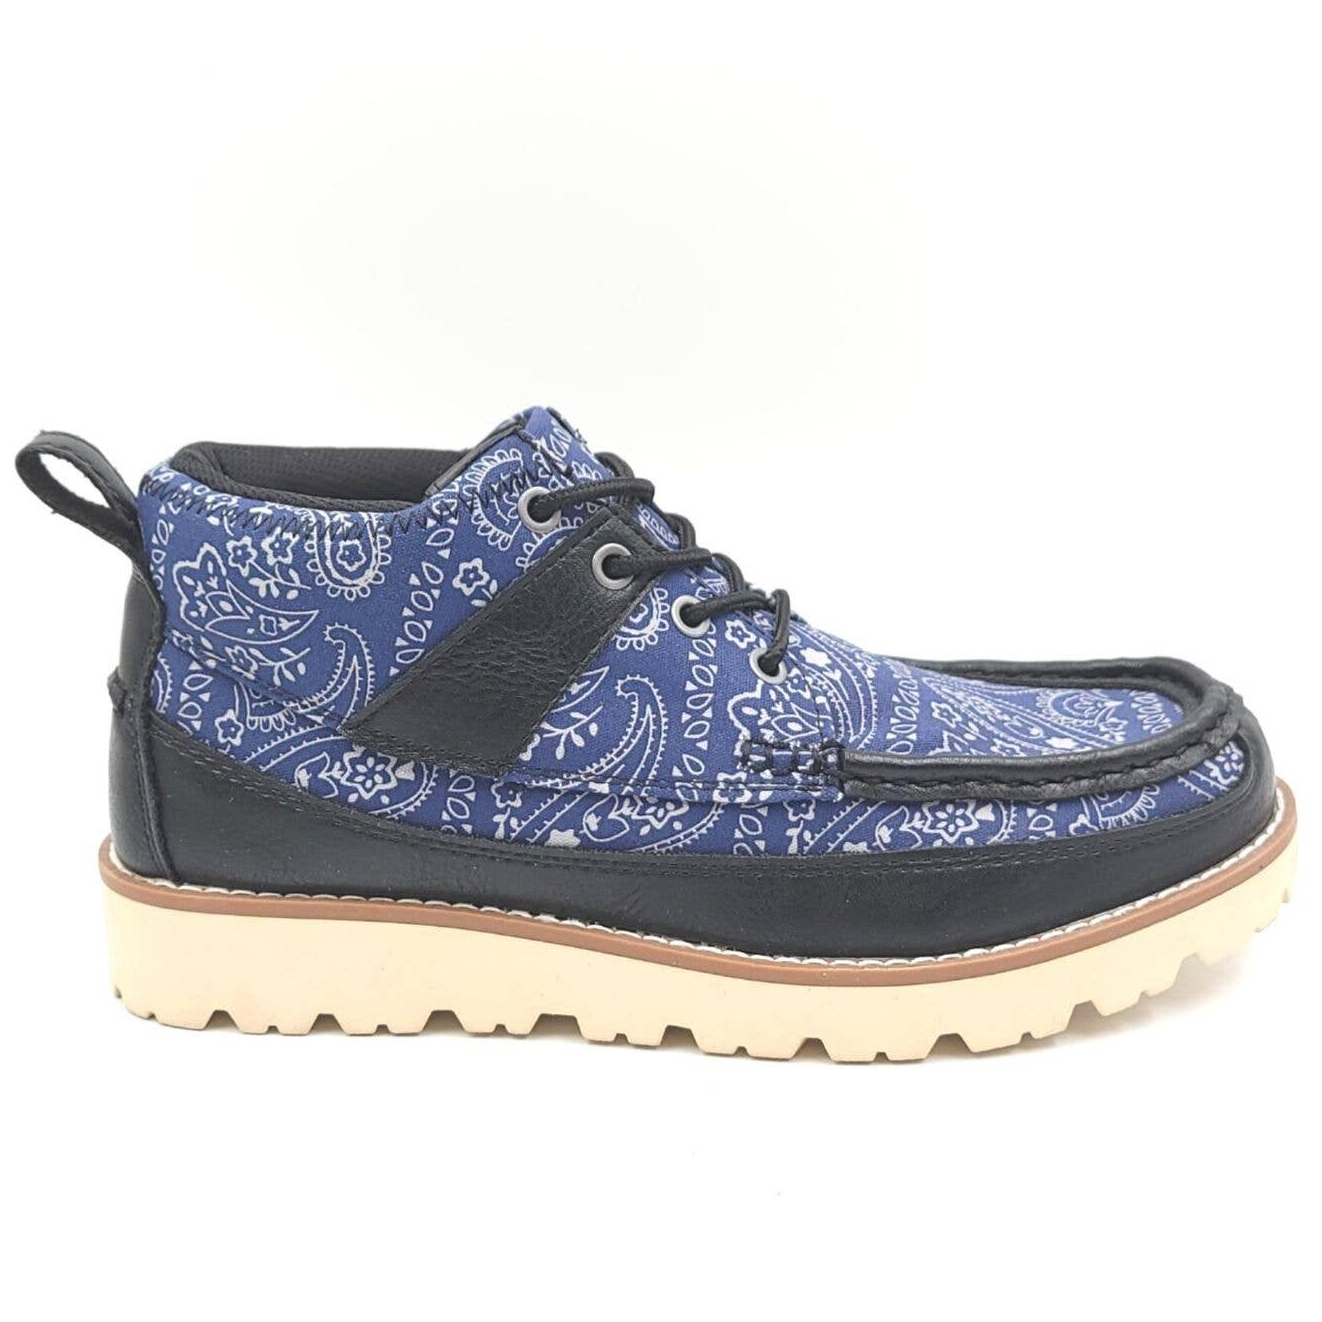 Primary image for Sun + Stone Men Lace Up Moc Toe Chukka Boots Kohen Size US 8M Navy Faux Leather